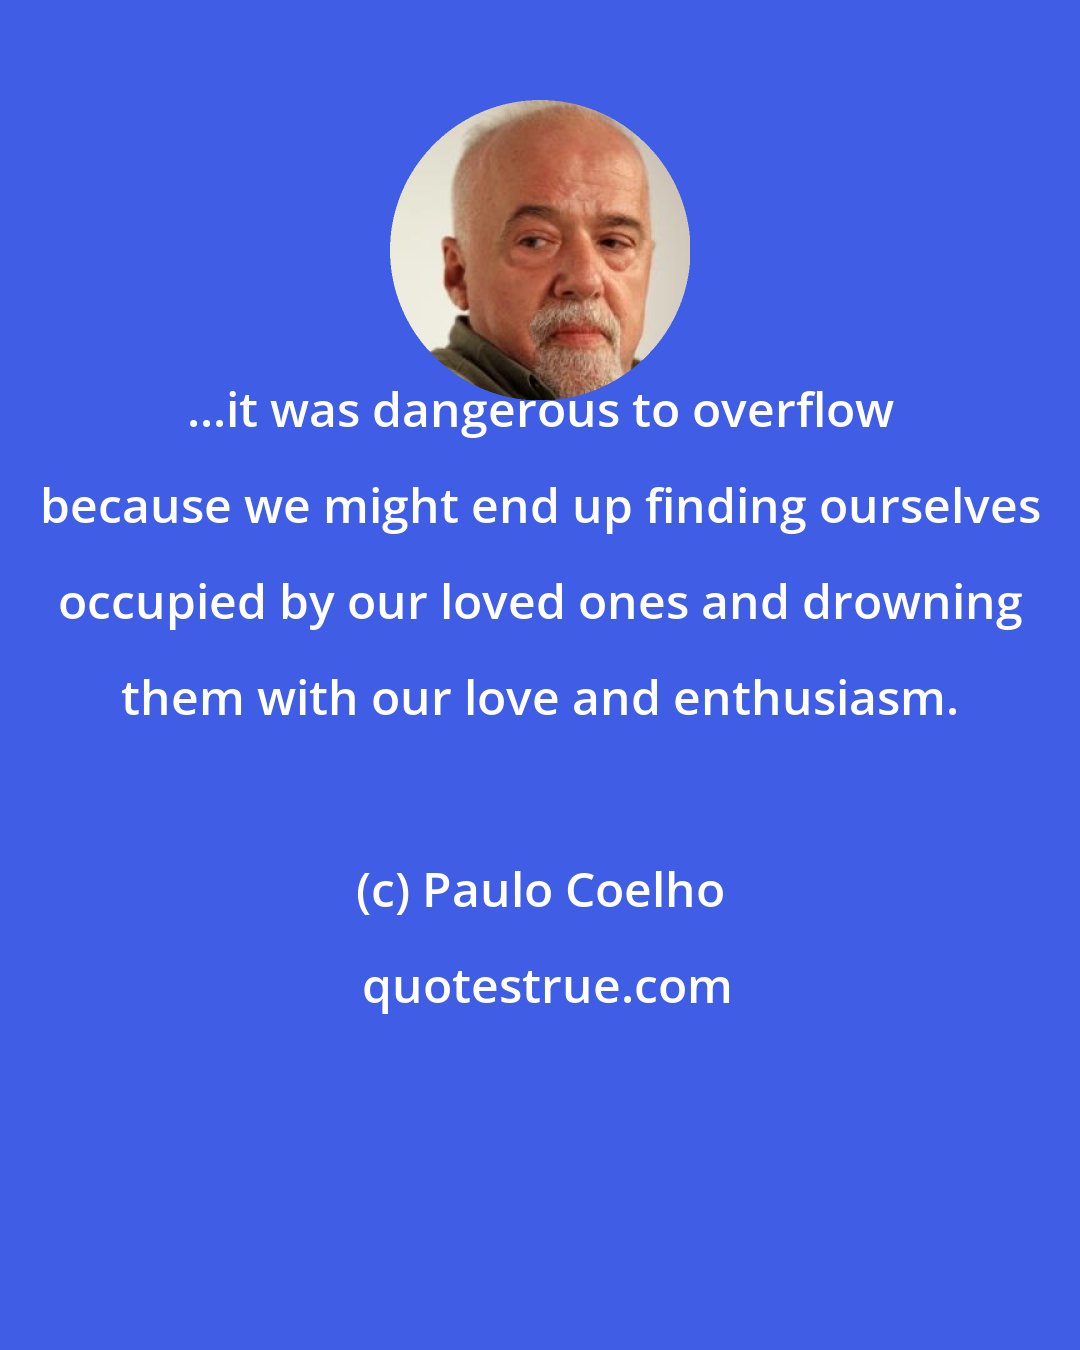 Paulo Coelho: ...it was dangerous to overflow because we might end up finding ourselves occupied by our loved ones and drowning them with our love and enthusiasm.